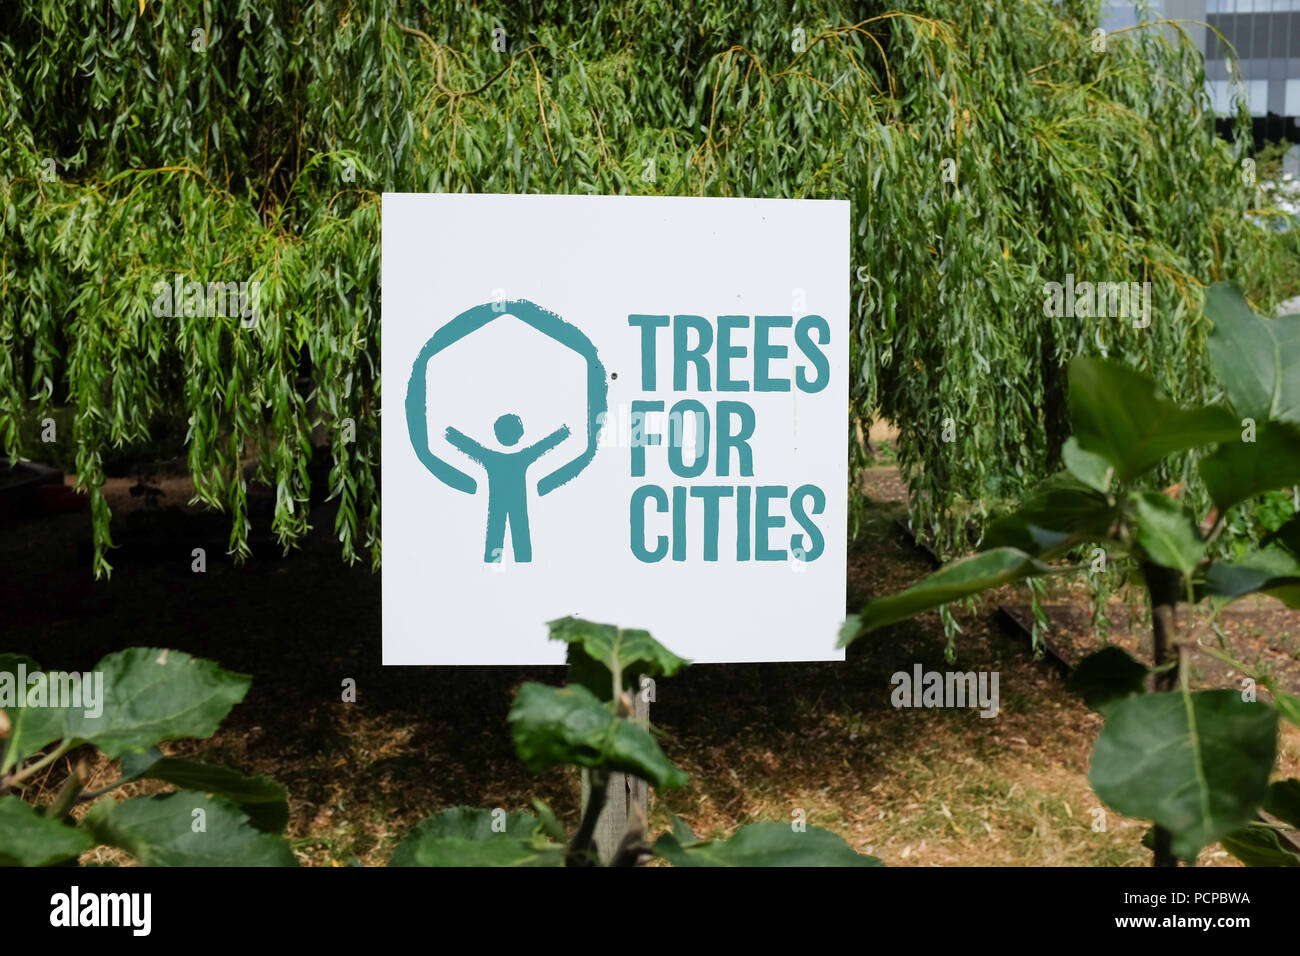 A sign for "Trees for Cities", a tree-planting charity based in the UK  Stock Photo - Alamy